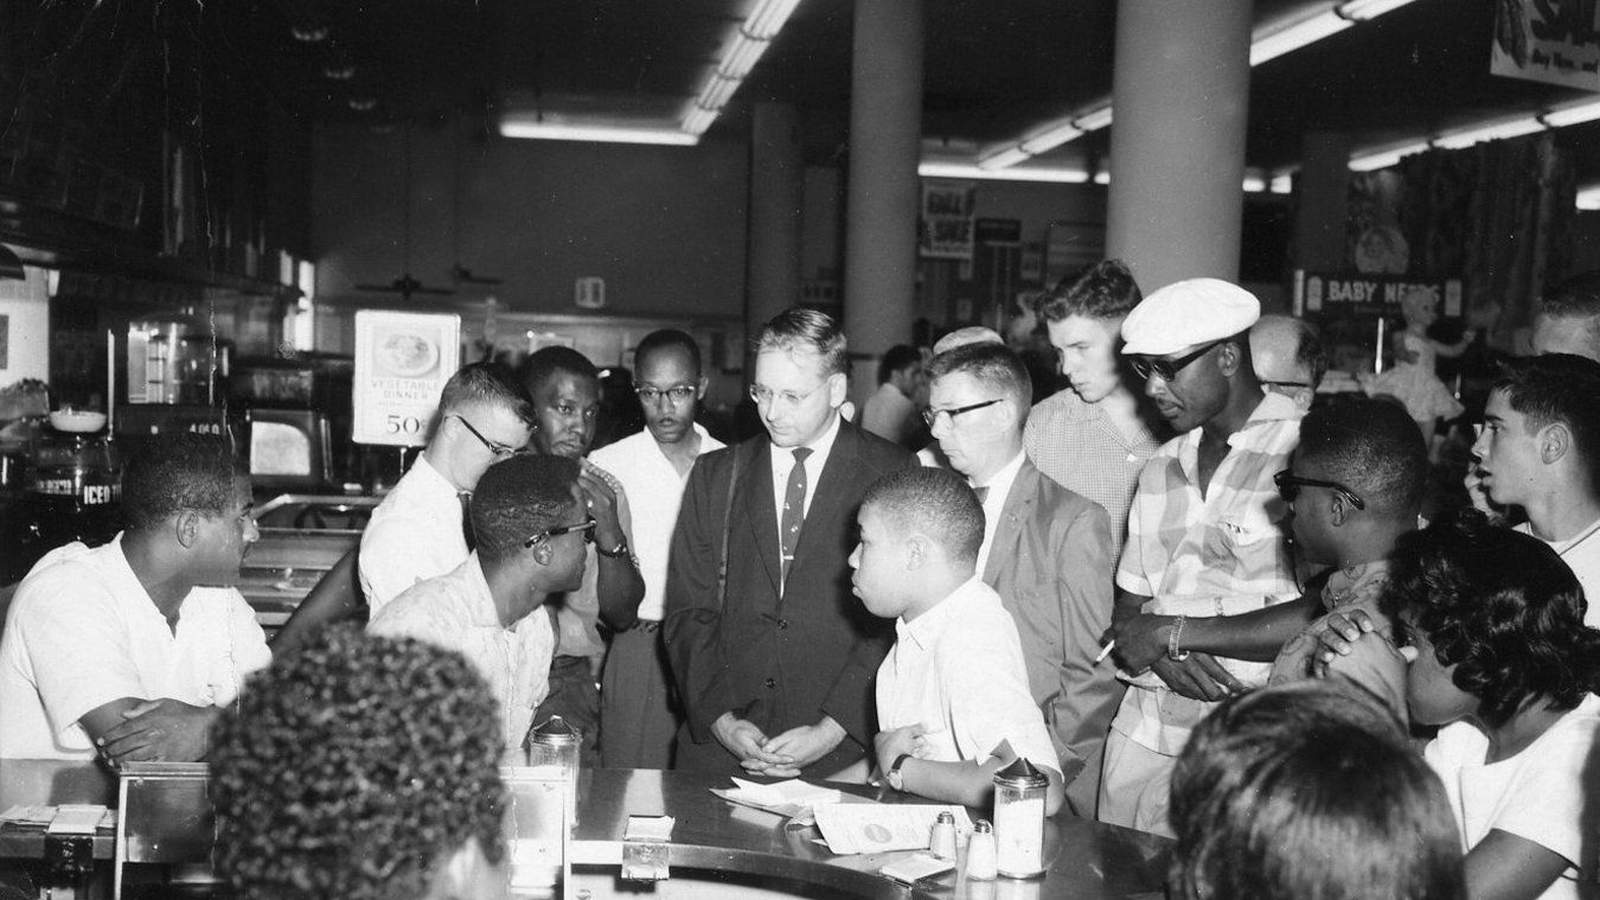 Divided by color: Jacksonville’s racially segregated past